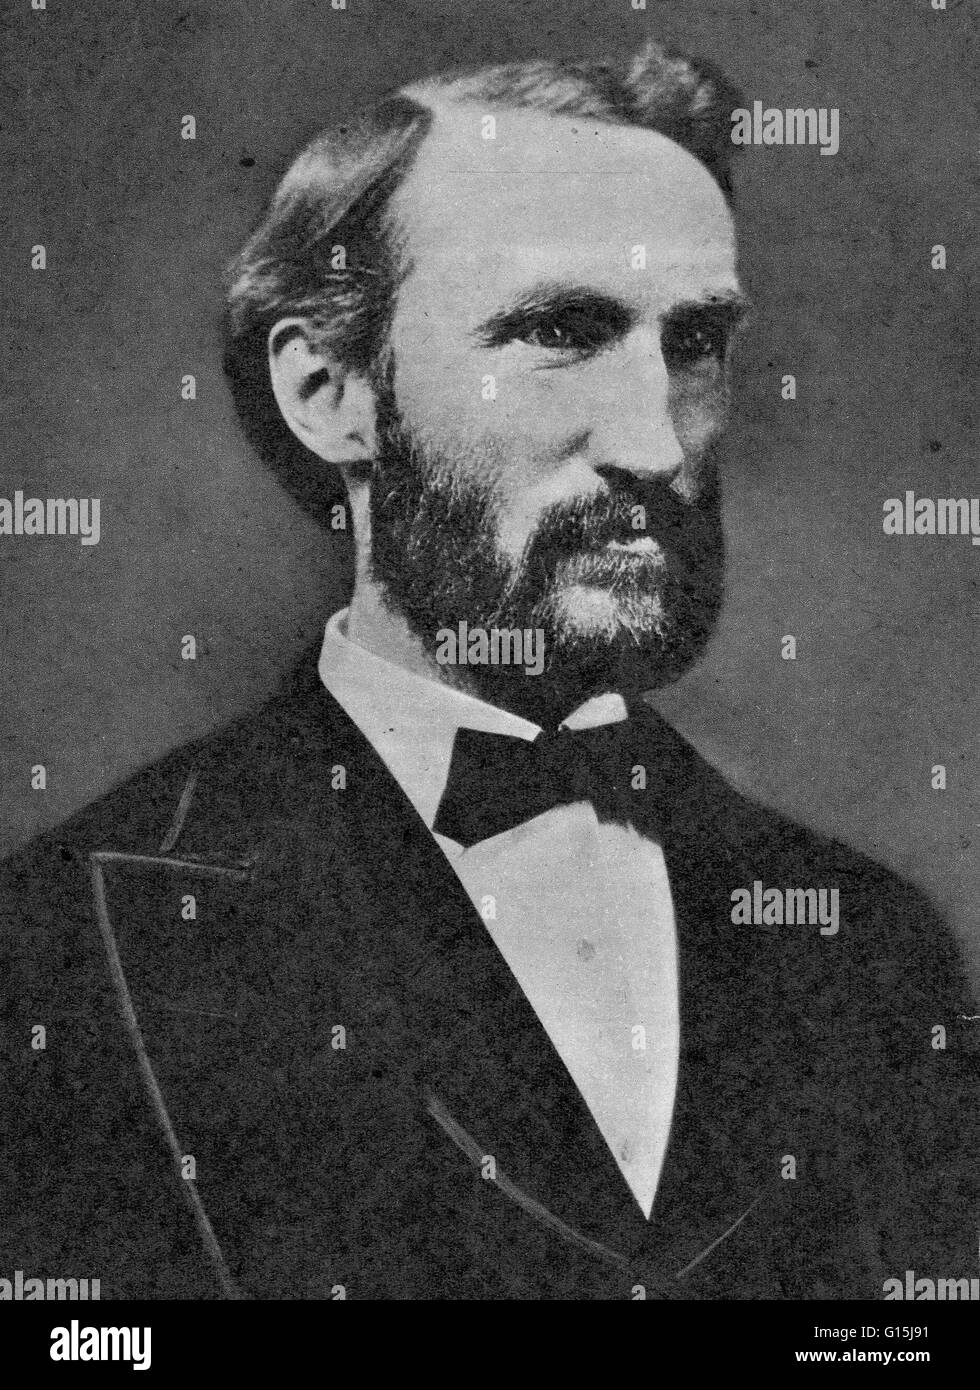 Josiah Willard Gibbs (1839-1903) was an American mathematician and theoretical physicist. Gibbs graduated from Yale University in 1858 and earned a PhD on gear design in 1863. He remained at Yale throughout his academic career, and was appointed professor Stock Photo